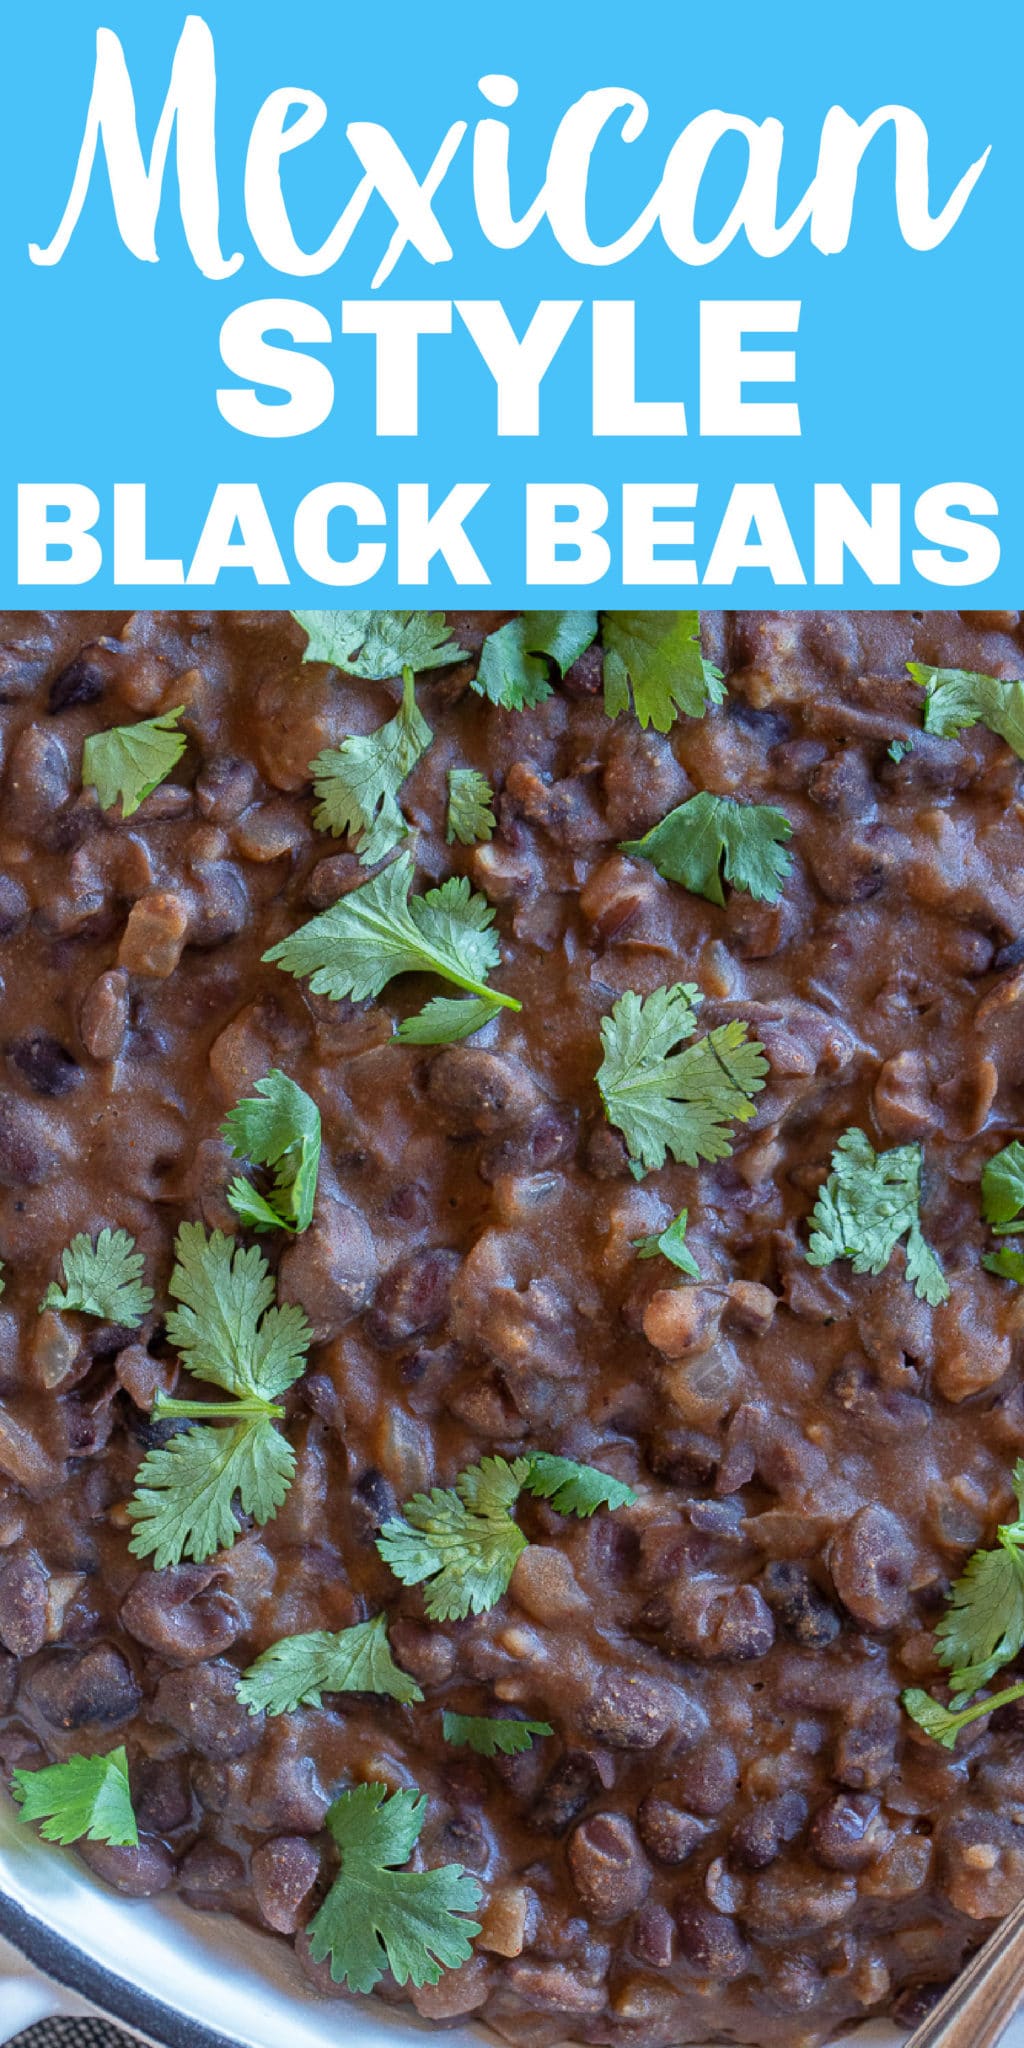 MEXICAN STYLE BLACK BEANS Scaled 